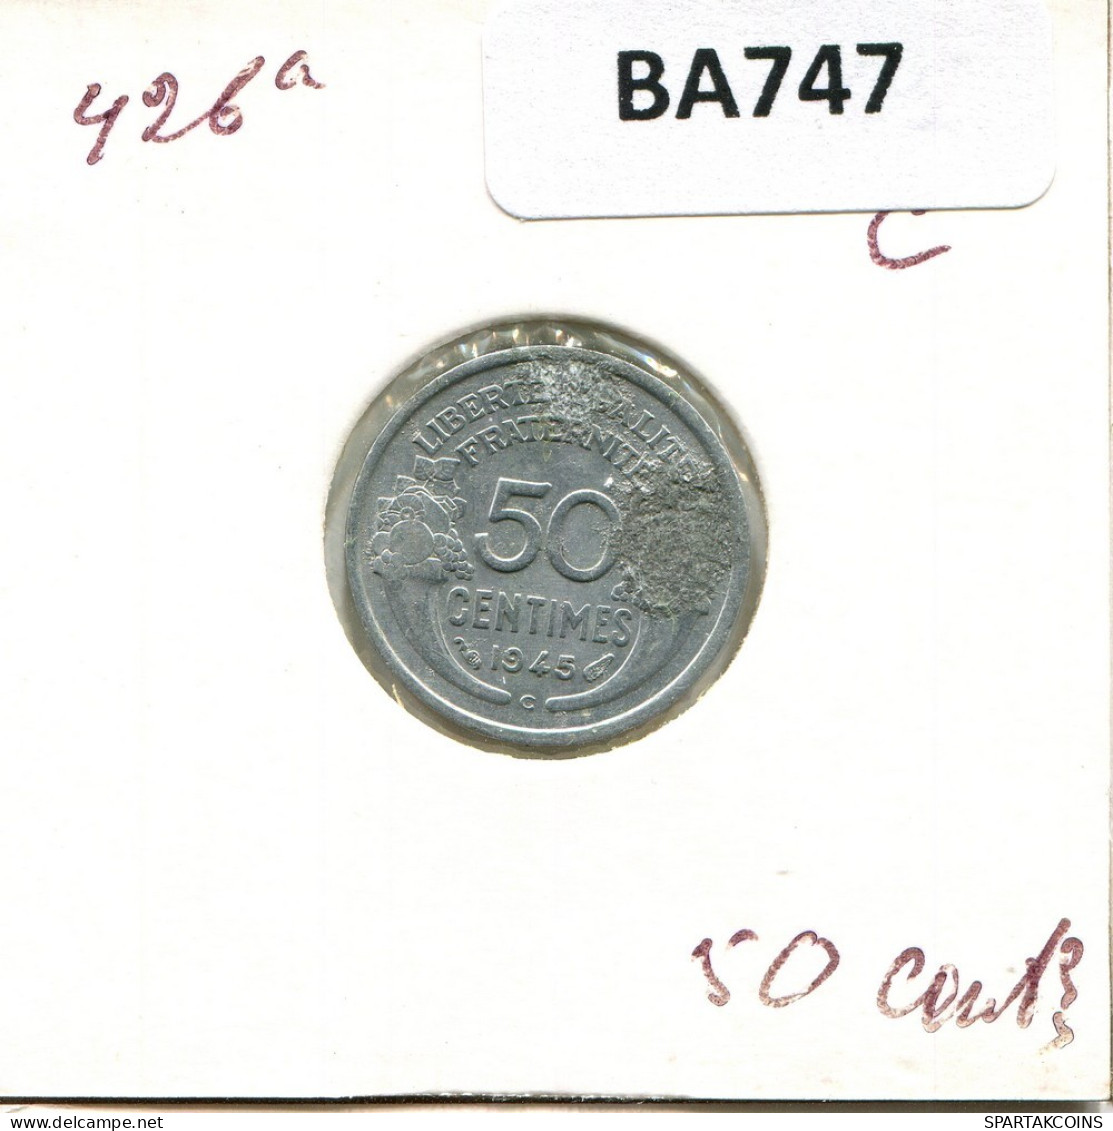 50 CENTIMES 1945 FRANCE French Coin #BA747.U.A - 50 Centimes